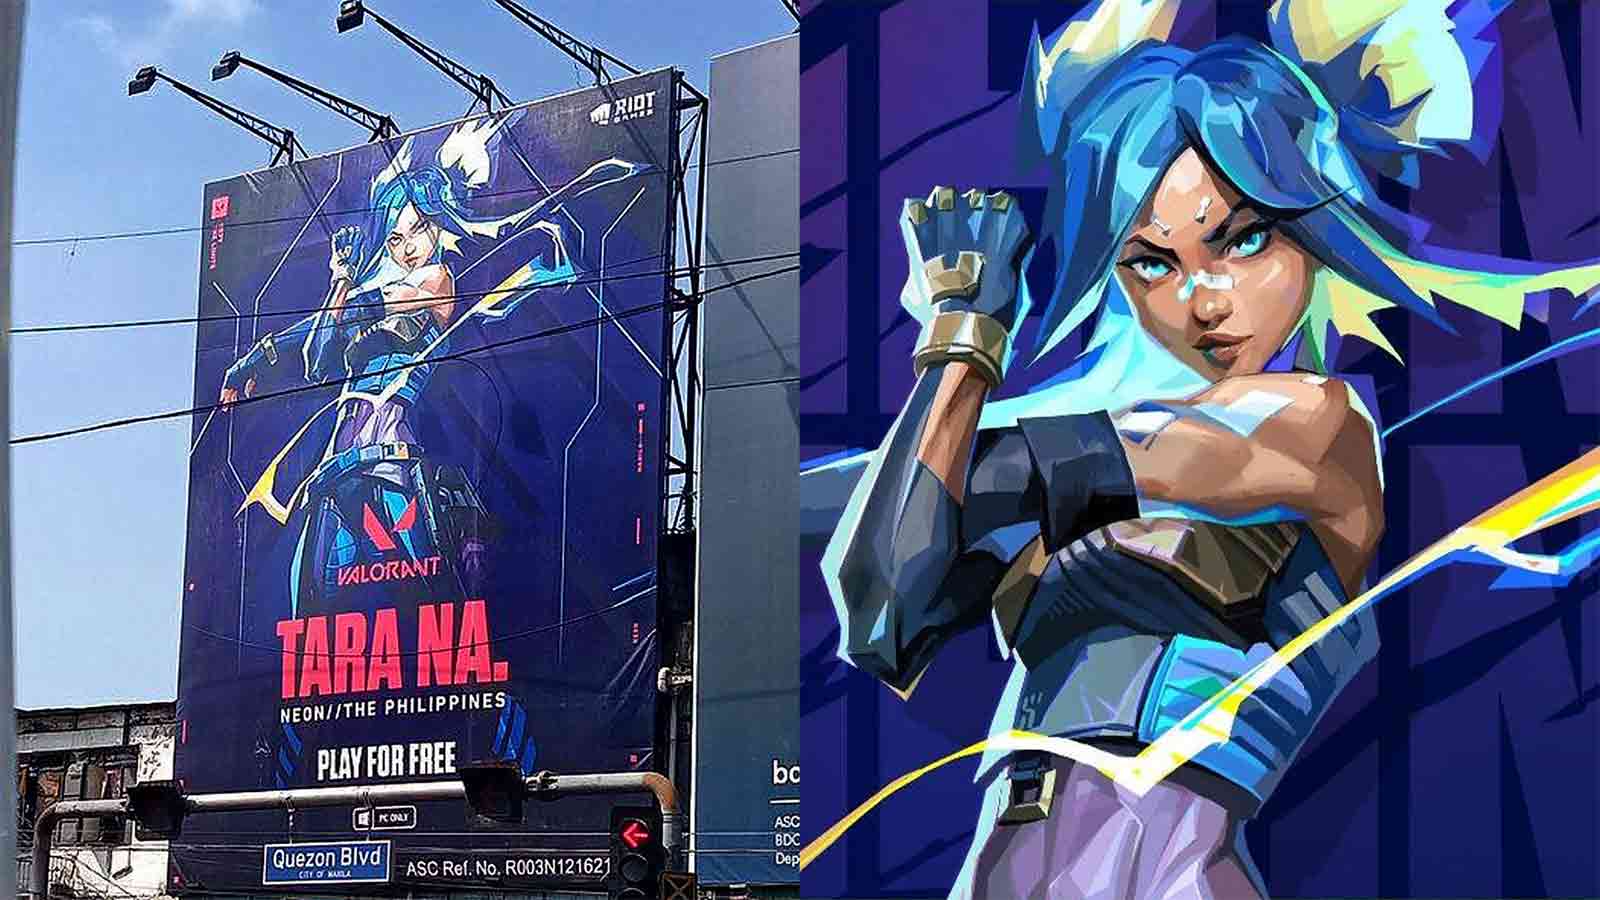 Neon takes center stage in the Philippines with new giant billboard